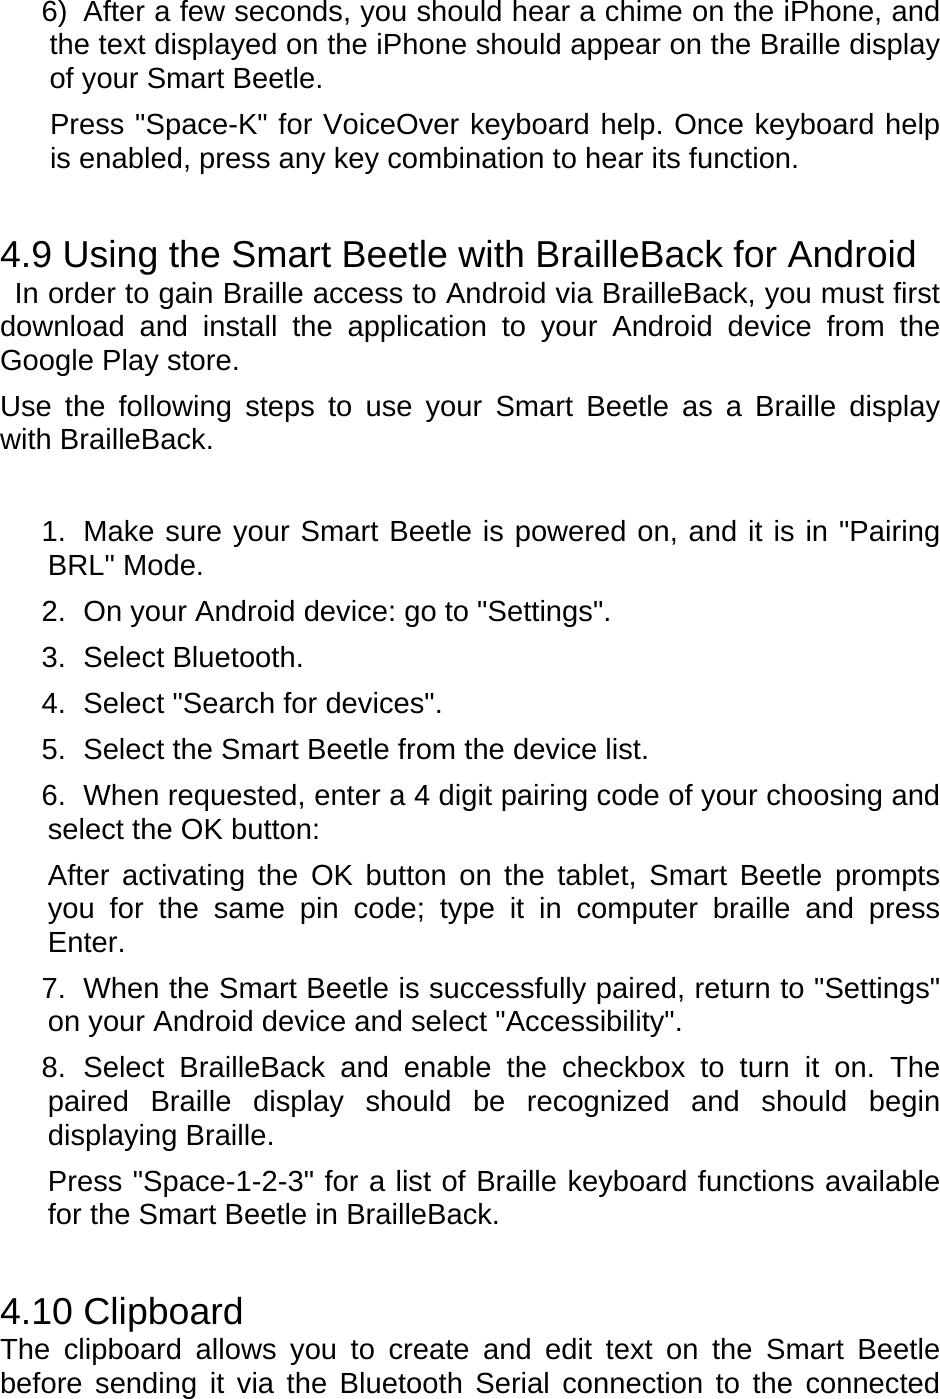 6)  After a few seconds, you should hear a chime on the iPhone, and the text displayed on the iPhone should appear on the Braille display of your Smart Beetle. Press &quot;Space-K&quot; for VoiceOver keyboard help. Once keyboard help is enabled, press any key combination to hear its function.    4.9 Using the Smart Beetle with BrailleBack for Android   In order to gain Braille access to Android via BrailleBack, you must first download and install the application to your Android device from the Google Play store. Use the following steps to use your Smart Beetle as a Braille display with BrailleBack.   1.  Make sure your Smart Beetle is powered on, and it is in &quot;Pairing BRL&quot; Mode. 2.  On your Android device: go to &quot;Settings&quot;. 3. Select Bluetooth. 4.  Select &quot;Search for devices&quot;. 5.  Select the Smart Beetle from the device list. 6.  When requested, enter a 4 digit pairing code of your choosing and select the OK button: After activating the OK button on the tablet, Smart Beetle prompts you for the same pin code; type it in computer braille and press Enter. 7.  When the Smart Beetle is successfully paired, return to &quot;Settings&quot; on your Android device and select &quot;Accessibility&quot;. 8. Select BrailleBack and enable the checkbox to turn it on. The paired Braille display should be recognized and should begin displaying Braille. Press &quot;Space-1-2-3&quot; for a list of Braille keyboard functions available for the Smart Beetle in BrailleBack.  4.10 Clipboard The clipboard allows you to create and edit text on the Smart Beetle before sending it via the Bluetooth Serial connection to the connected 